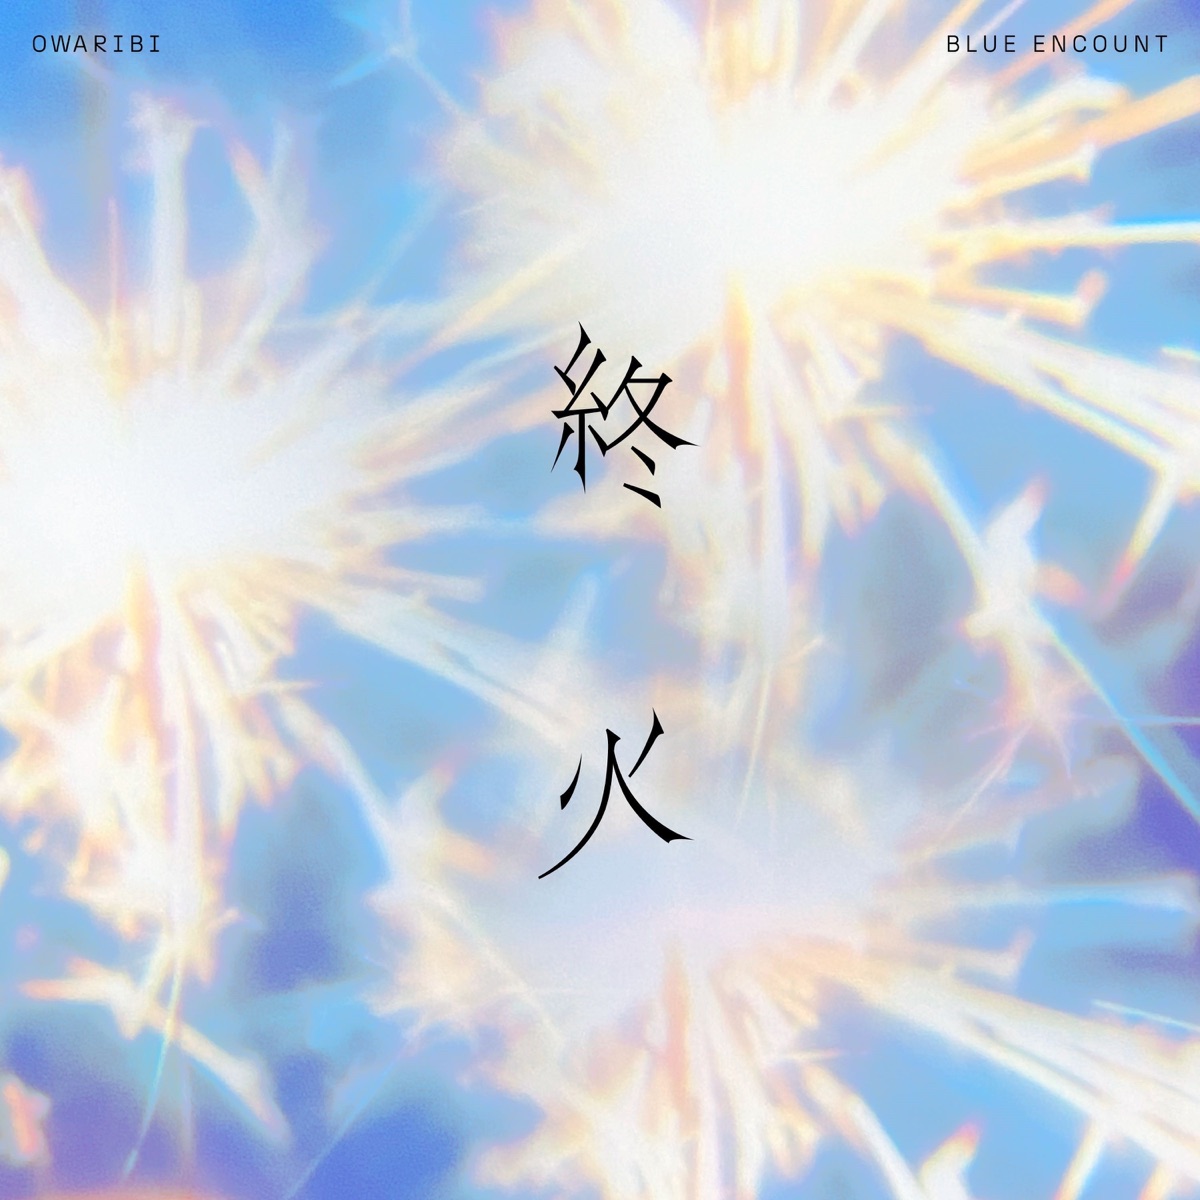 Cover art for『BLUE ENCOUNT - 終火』from the release『OWARIBI